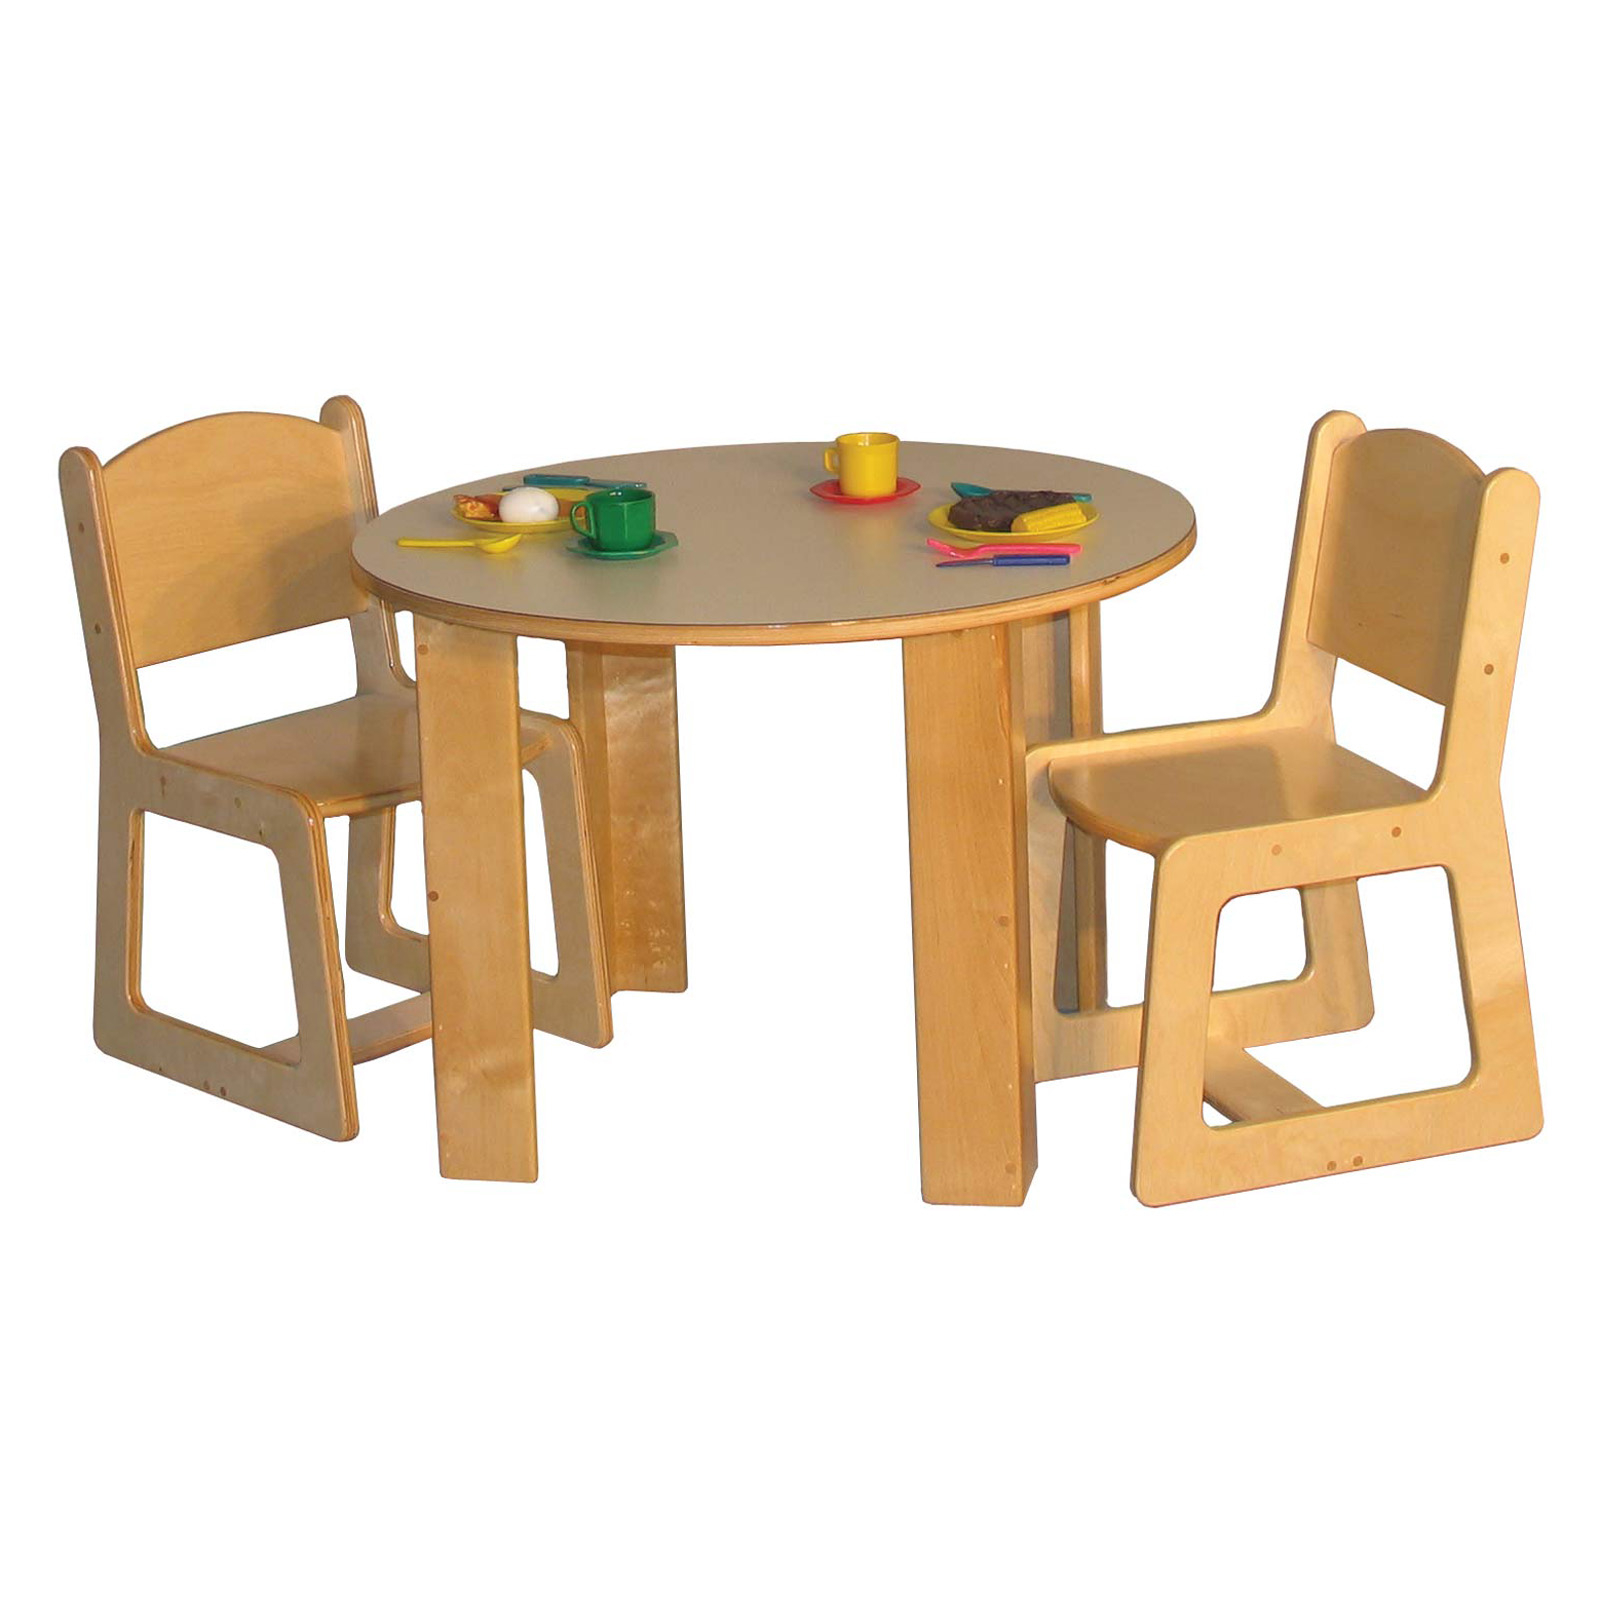 Round table and chairs for kids 28